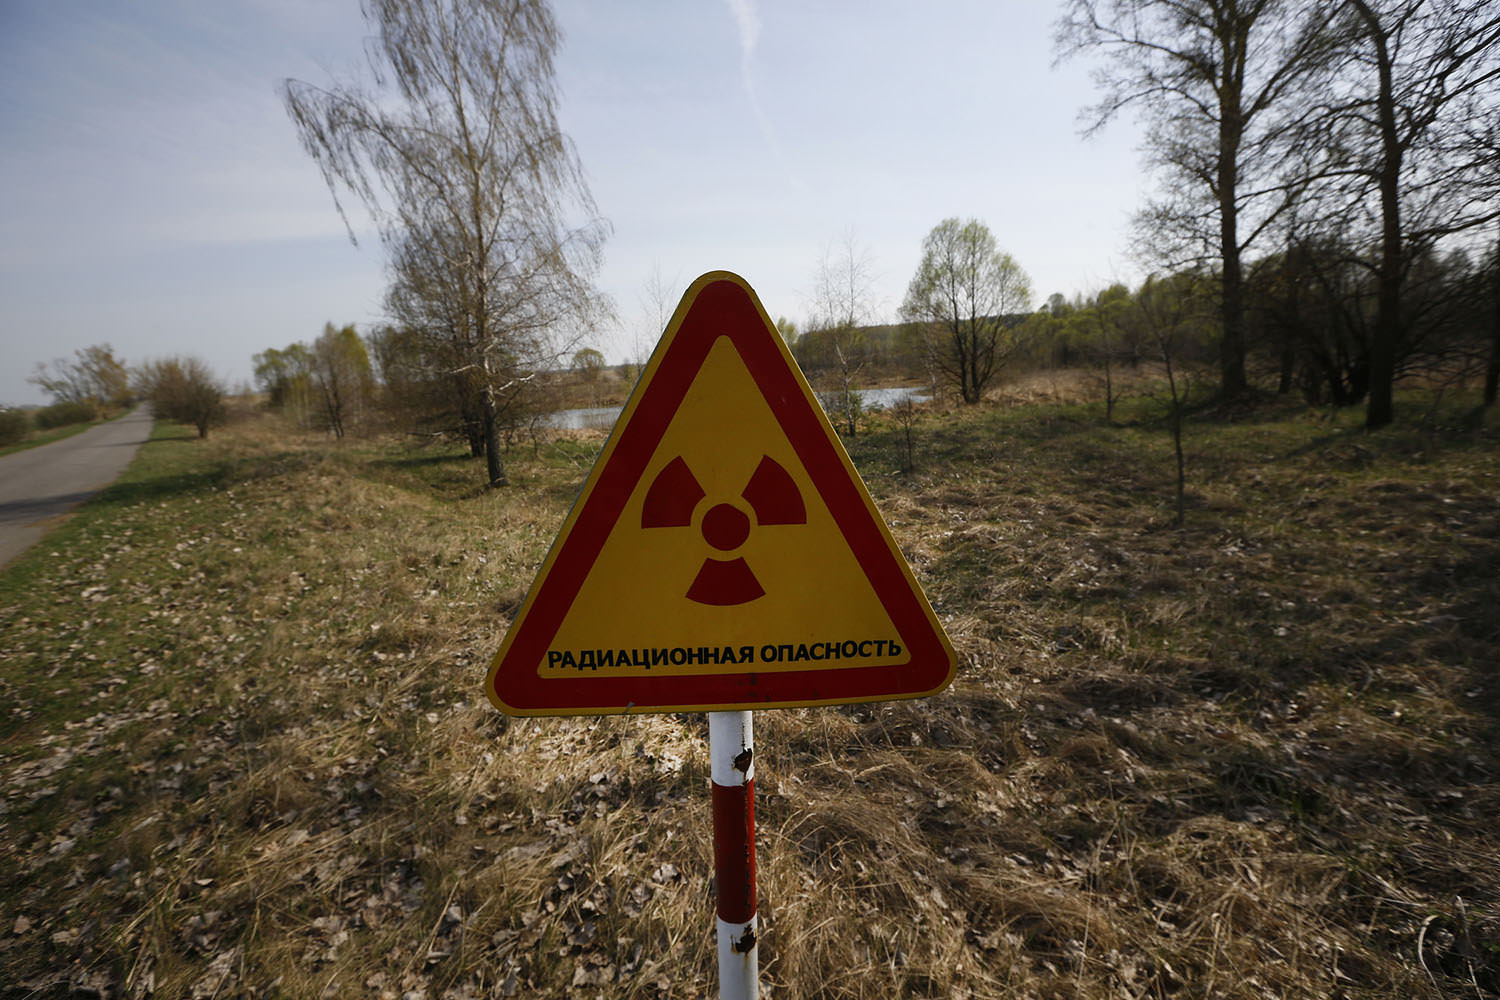 radiation sign chernobyl exclusion zone